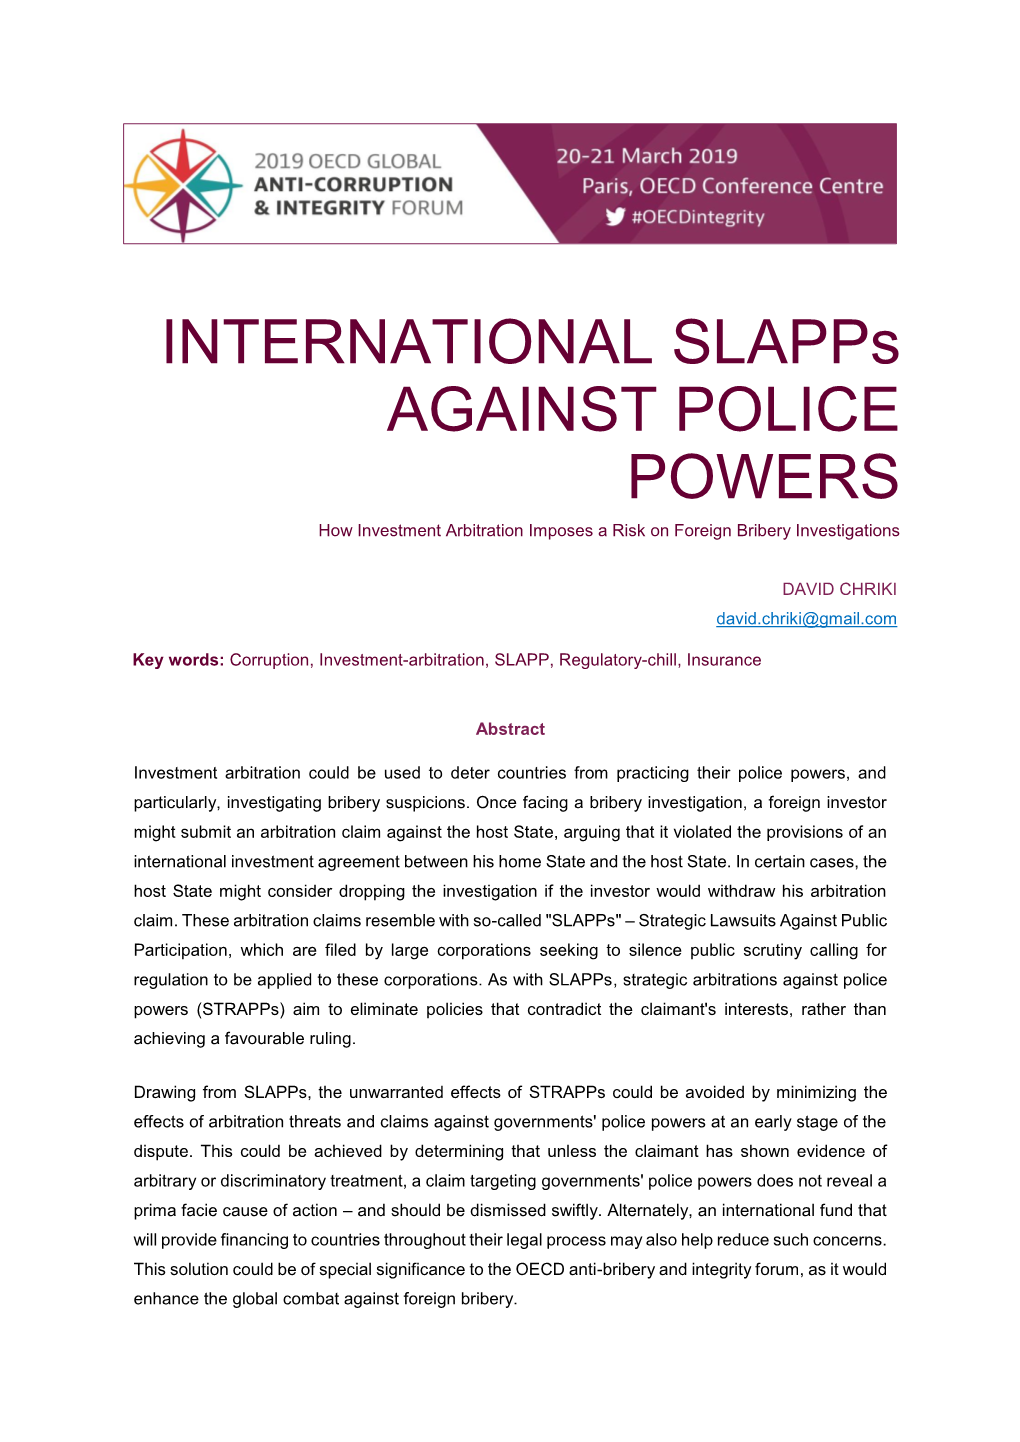 Slapps AGAINST POLICE POWERS How Investment Arbitration Imposes a Risk on Foreign Bribery Investigations